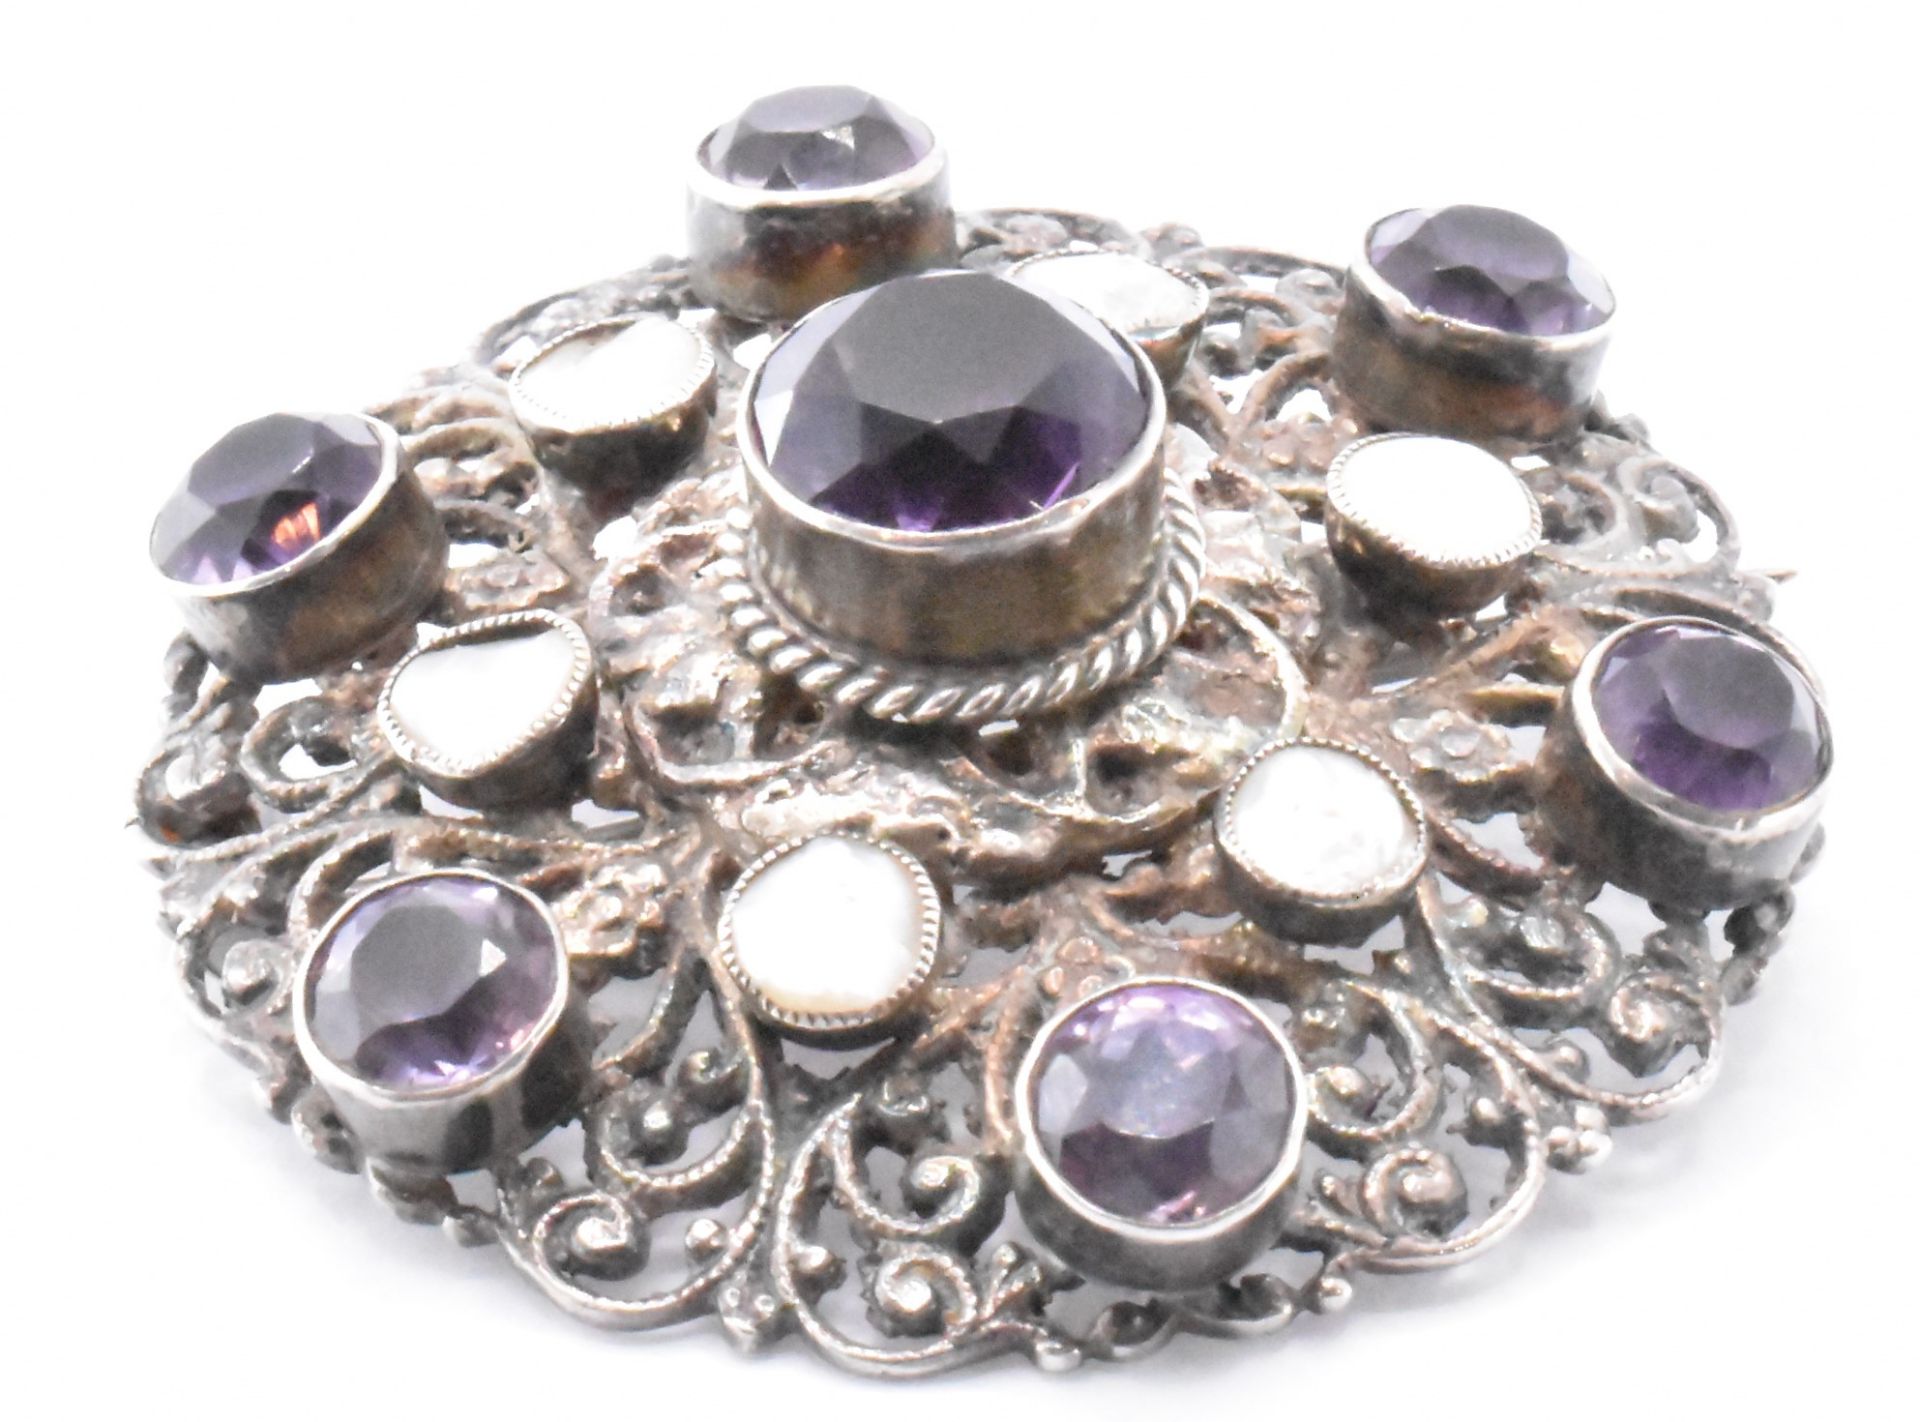 EARLY 20TH CENTURY SILVER AMETHYST & MOTHER OF PEARL BROOCH - Image 6 of 6